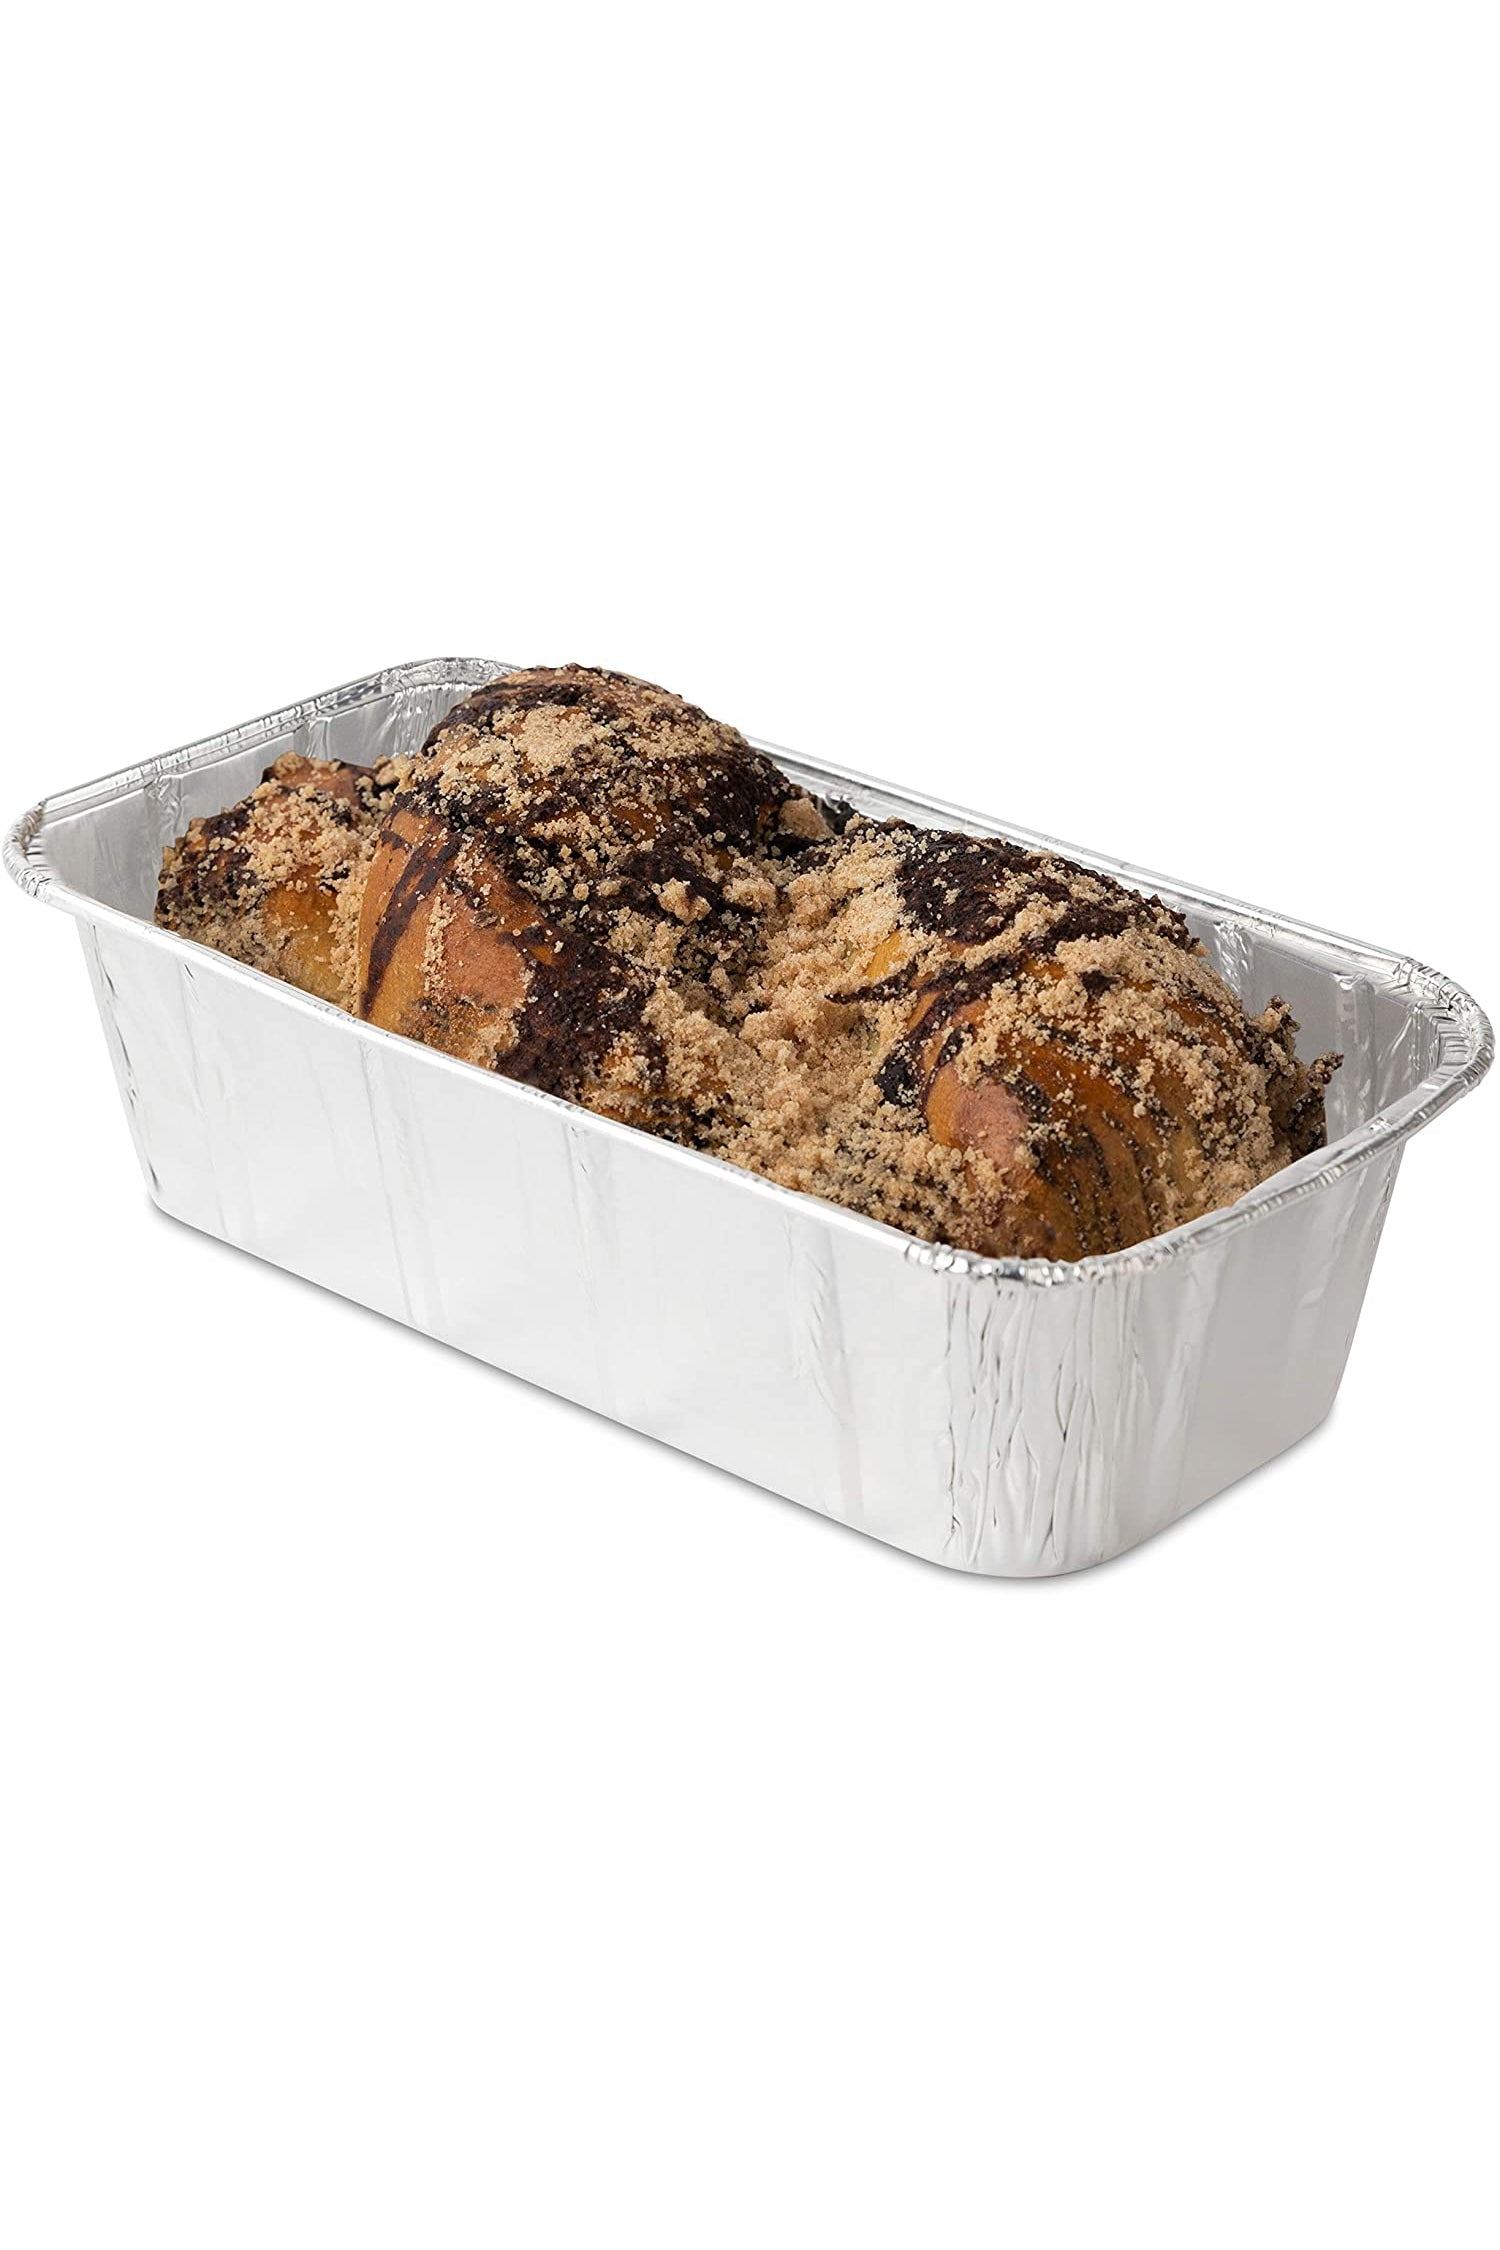 SINTOP Aluminum Bread Pans Disposable 8x4 Loaf Pans with Lids 50 Pack  Dessert Boxes - Perfect for Baking, Storing, Takeout